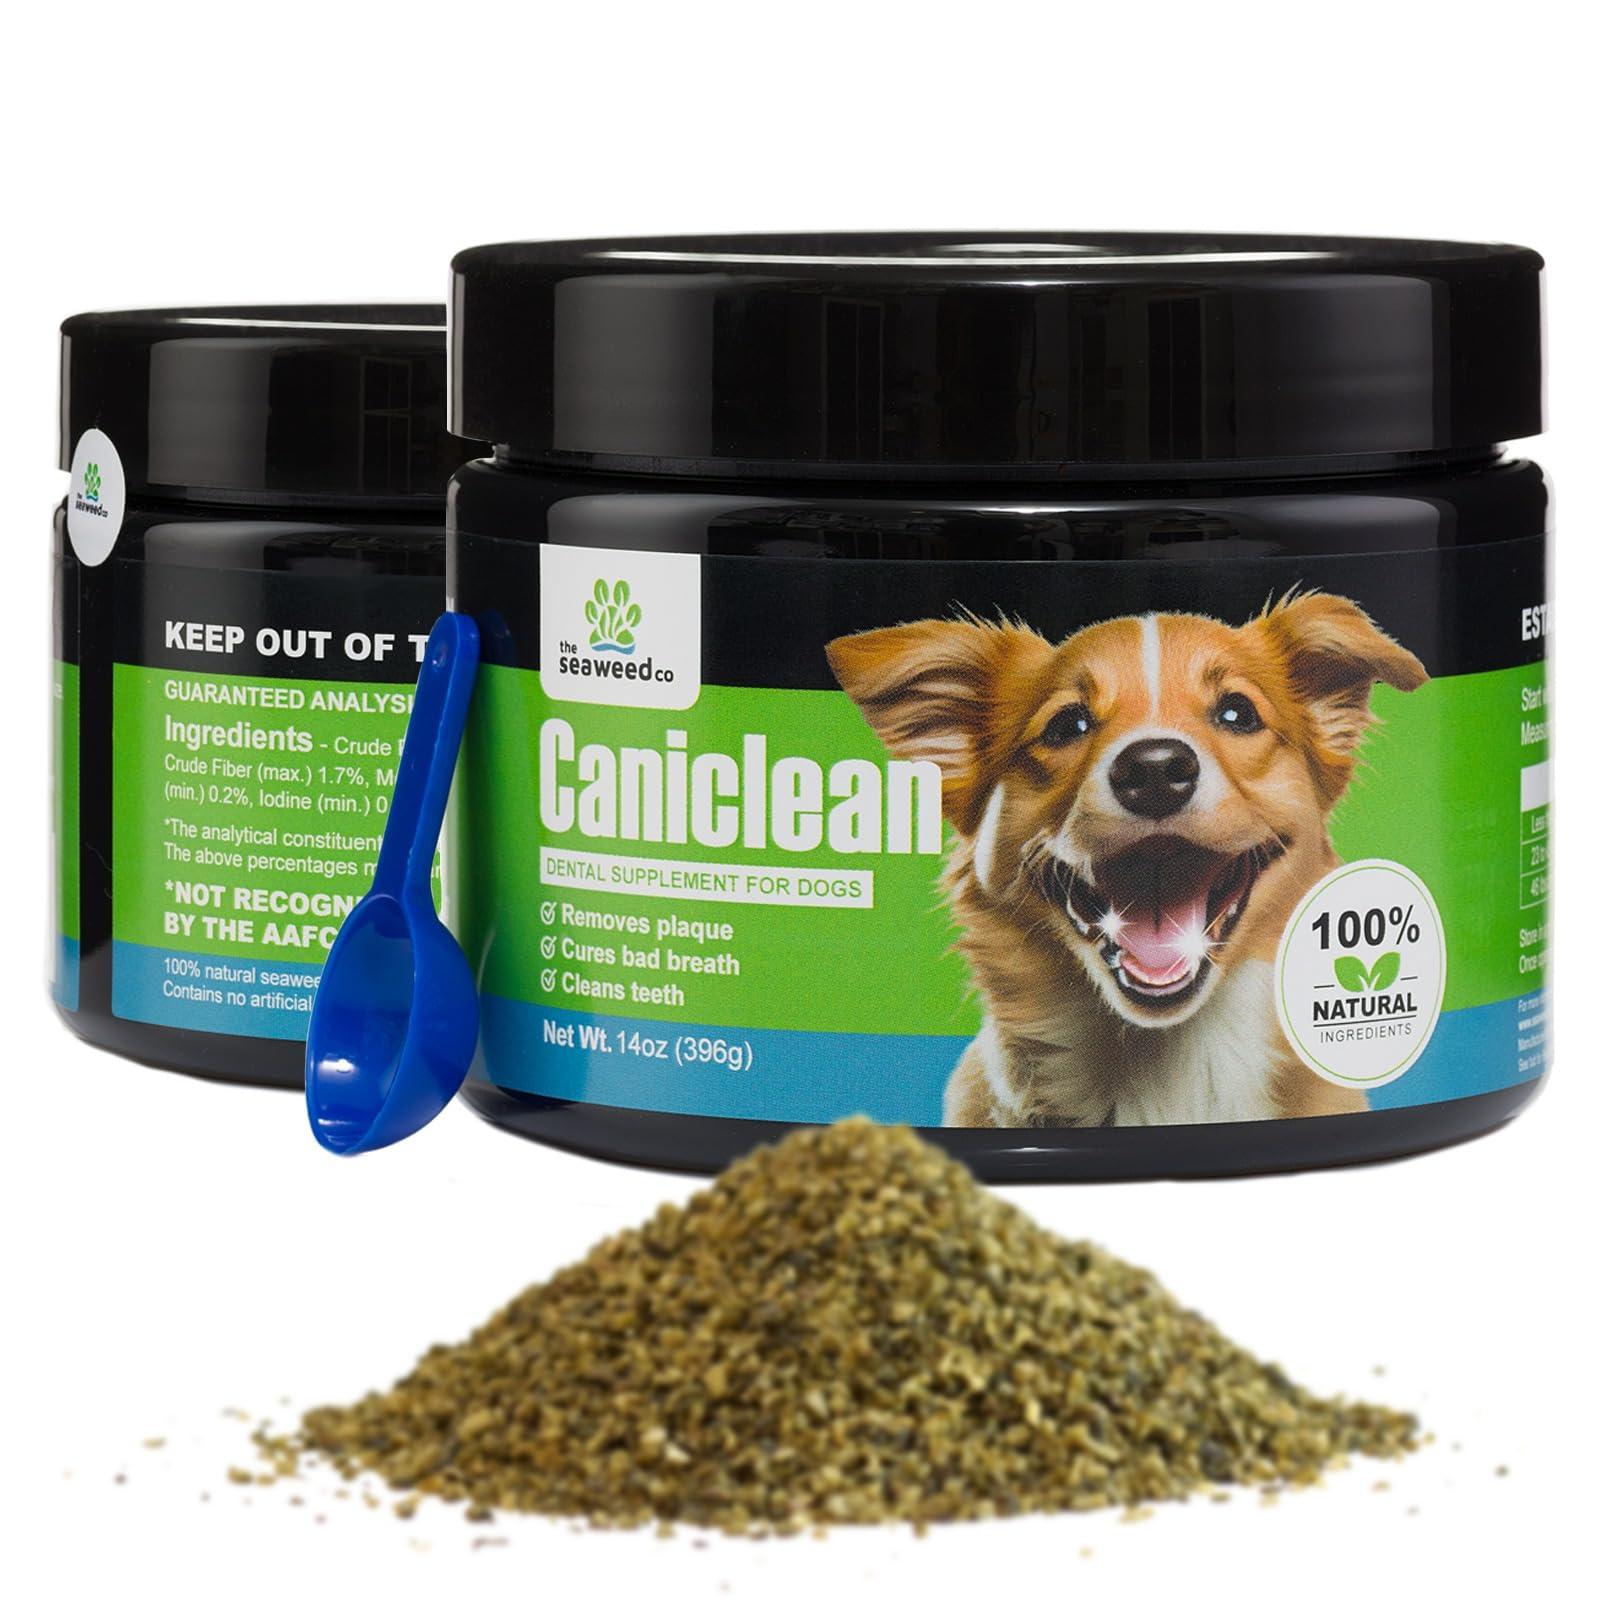 Caniclean Seaweed for Dogs Teeth - Dog Tartar Removal Tool, Plaque Remover, and Breath Freshener - Get Plaque Off Dogs Teeth Naturally